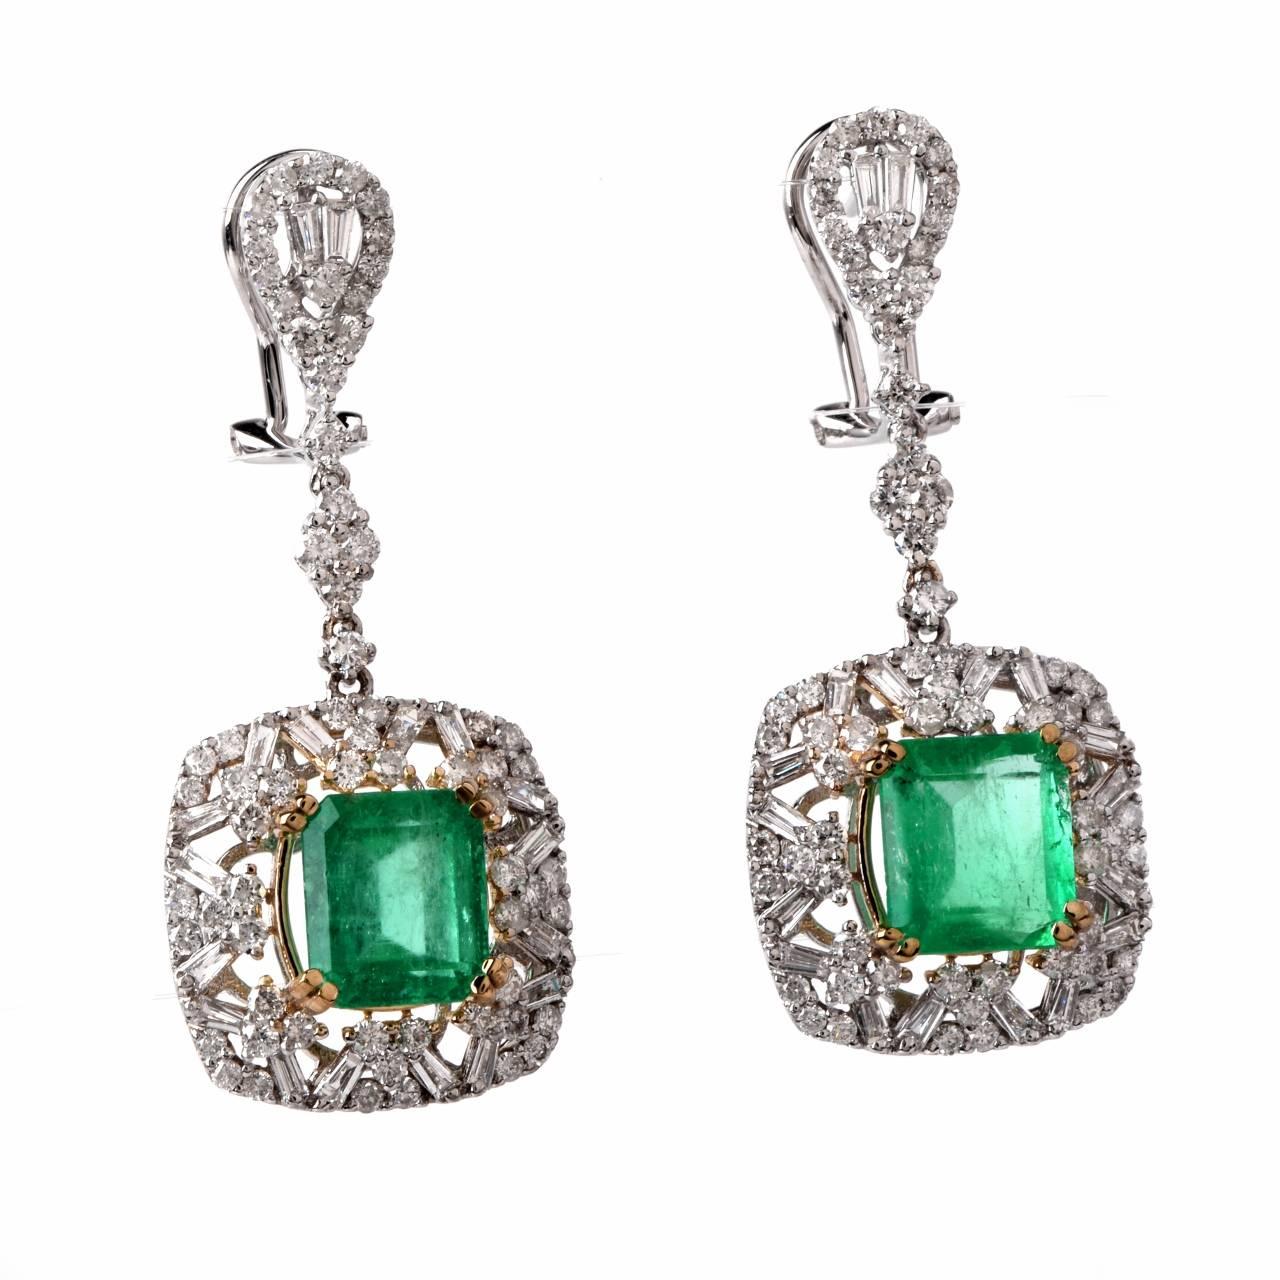 These  Art Deco style earrings with a pair of emerald-cut emeralds, tapered baguettes and round-faceted diamonds are handcrafted in solid 18K white gold with a touch of yellow gold applied to the emerald settings. They are centered with emerald-cut